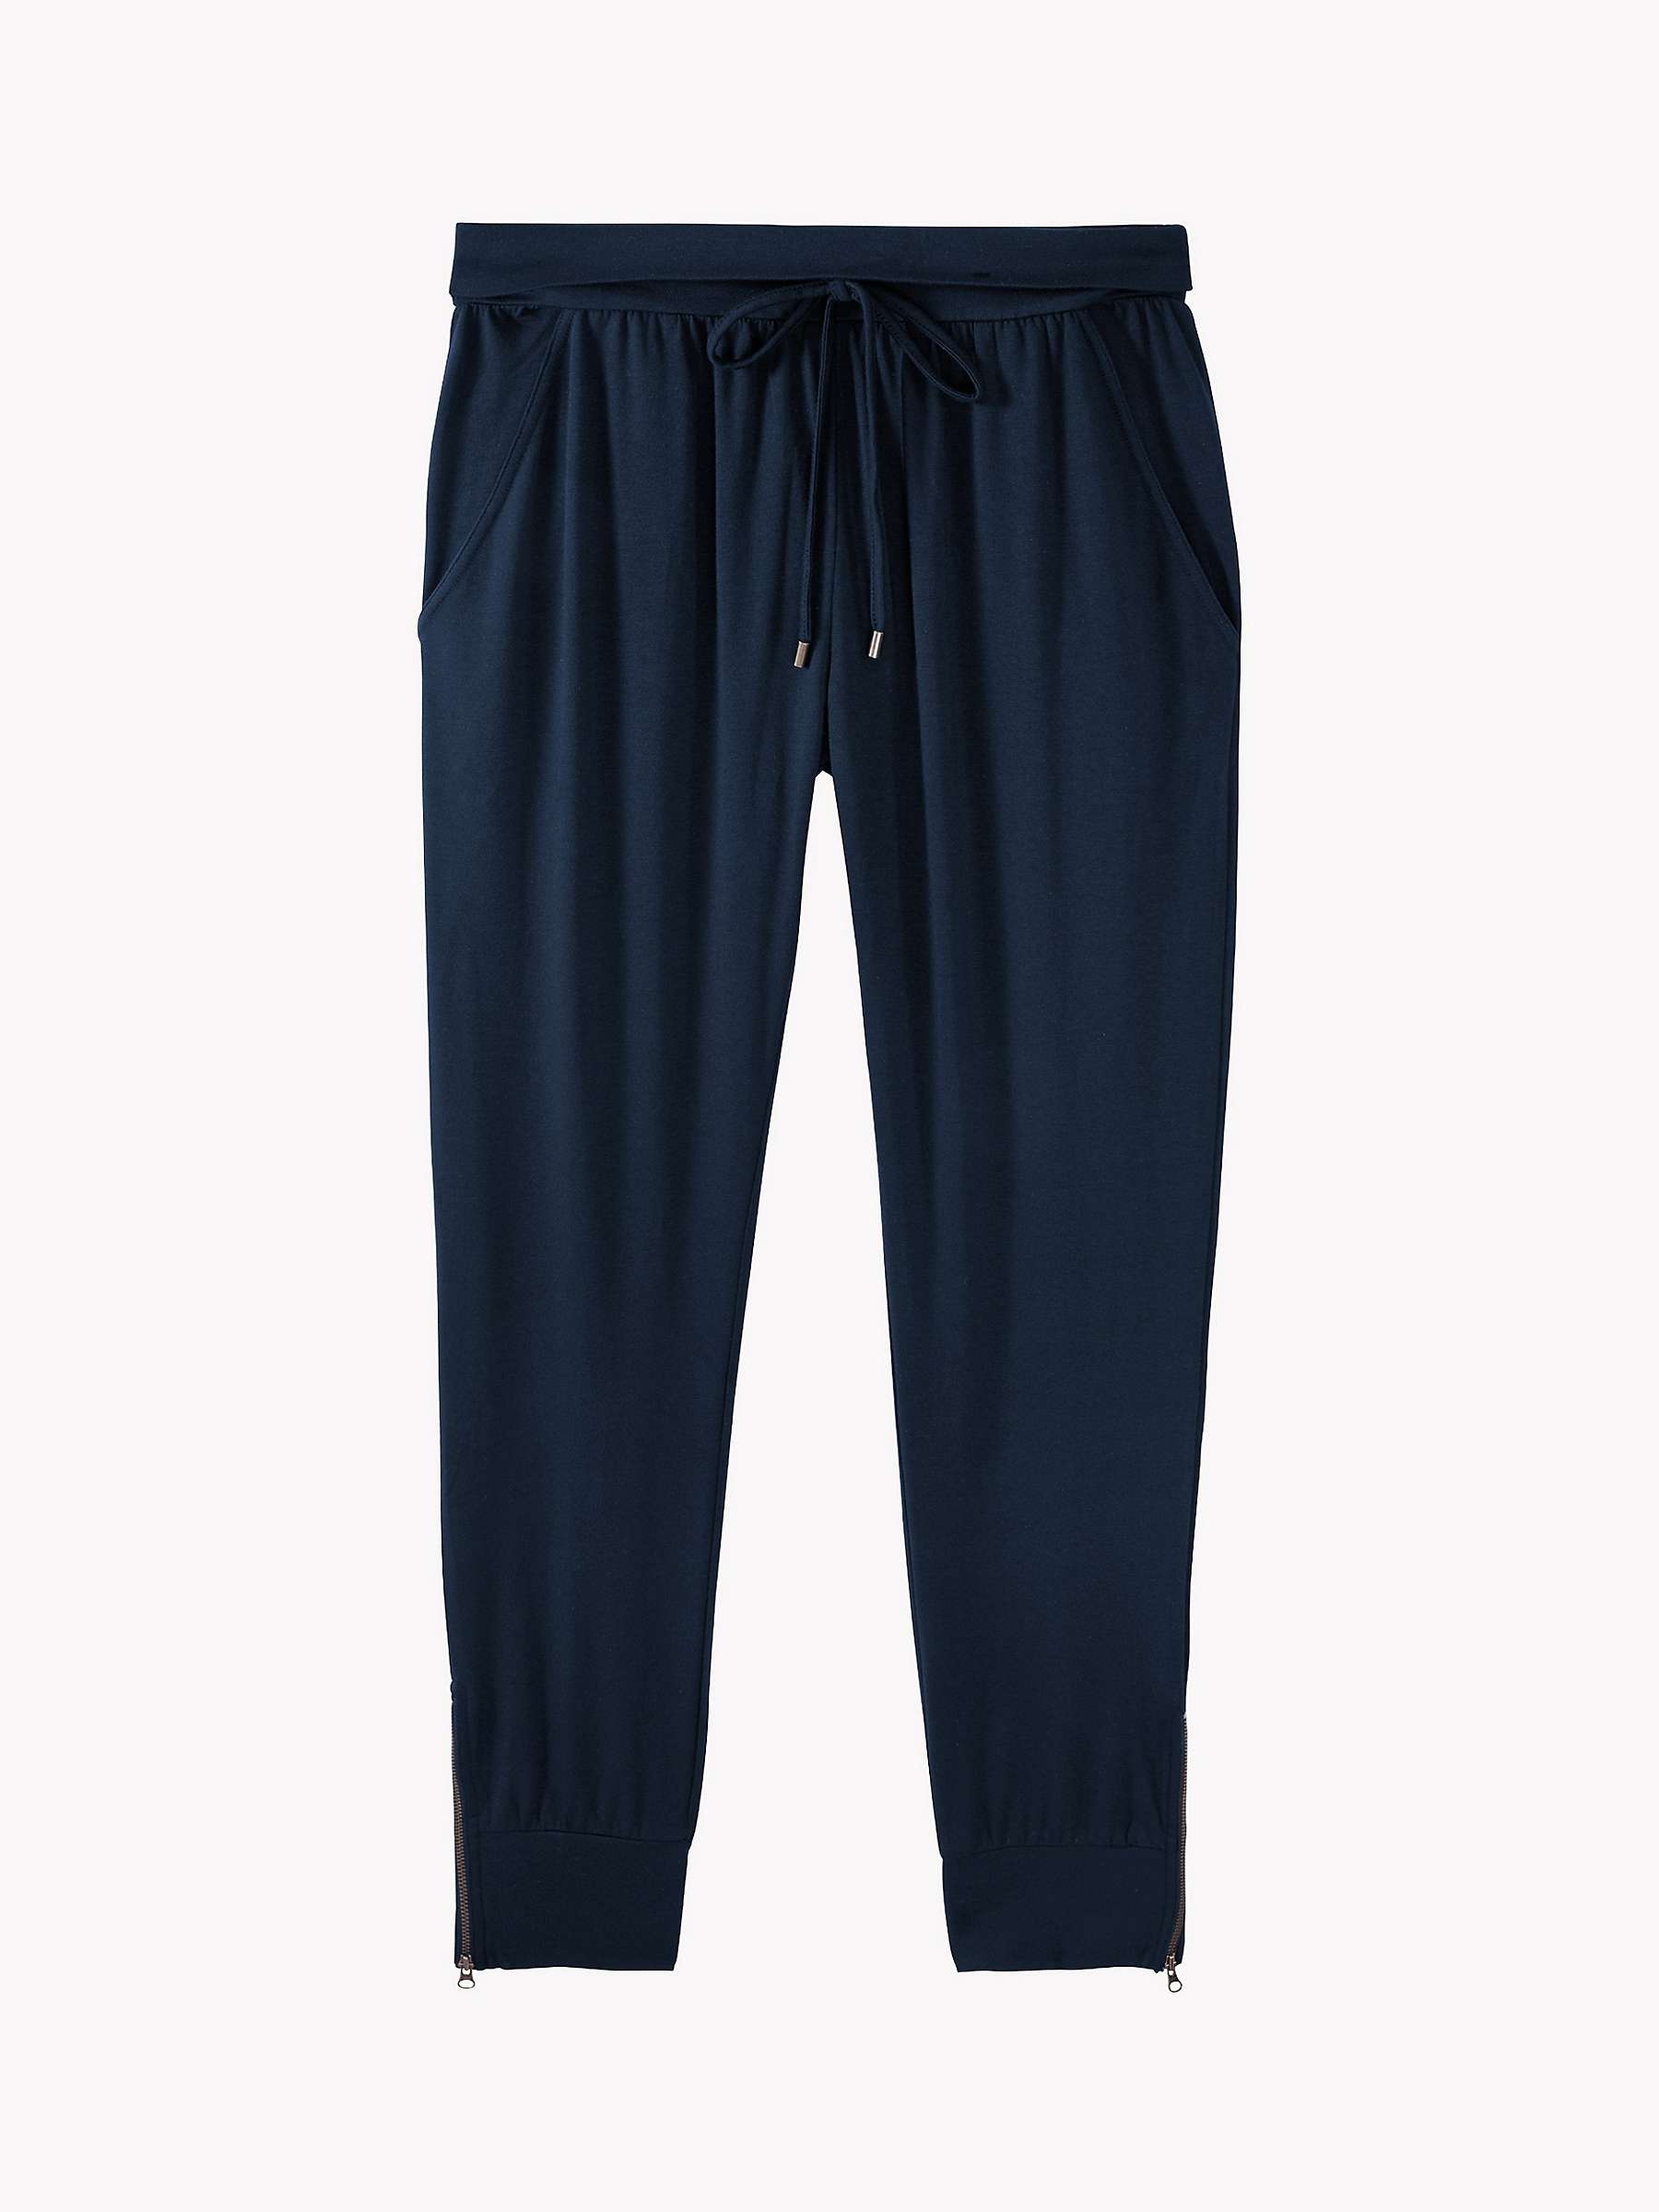 Buy hush Amie Joggers Online at johnlewis.com